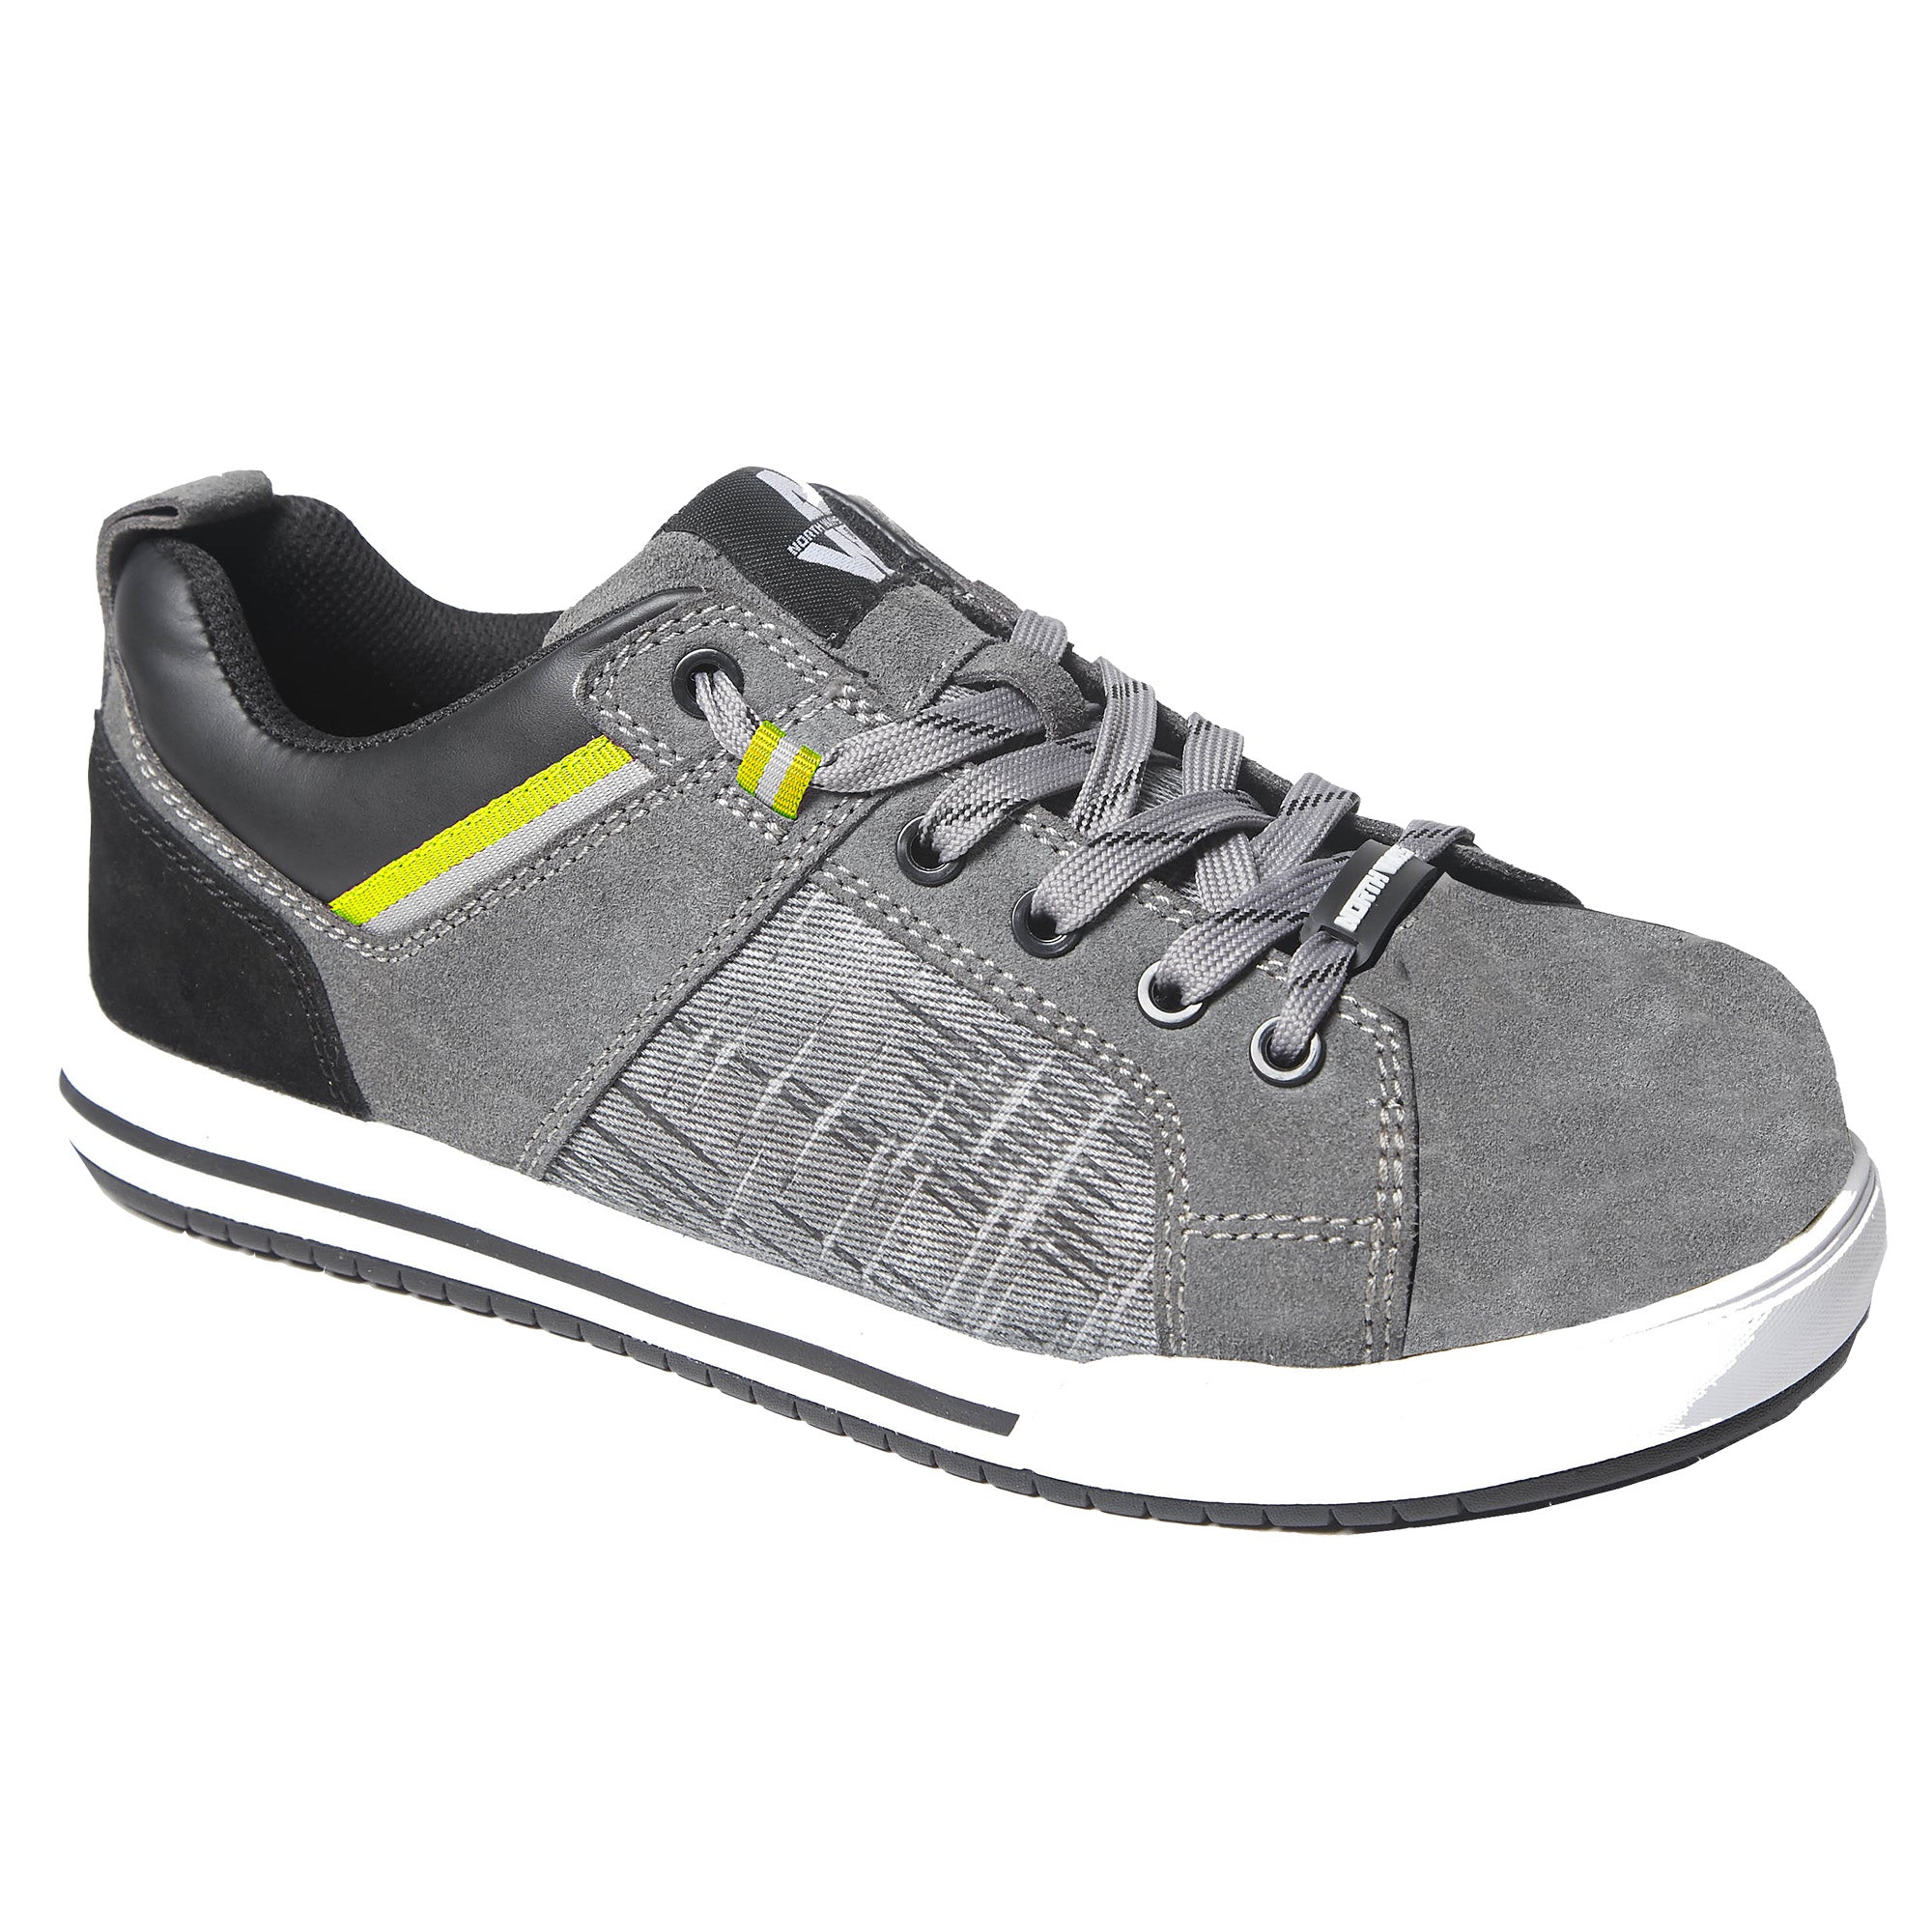 PARKER - LOW SAFETY SHOES - 7035 | Dark grey